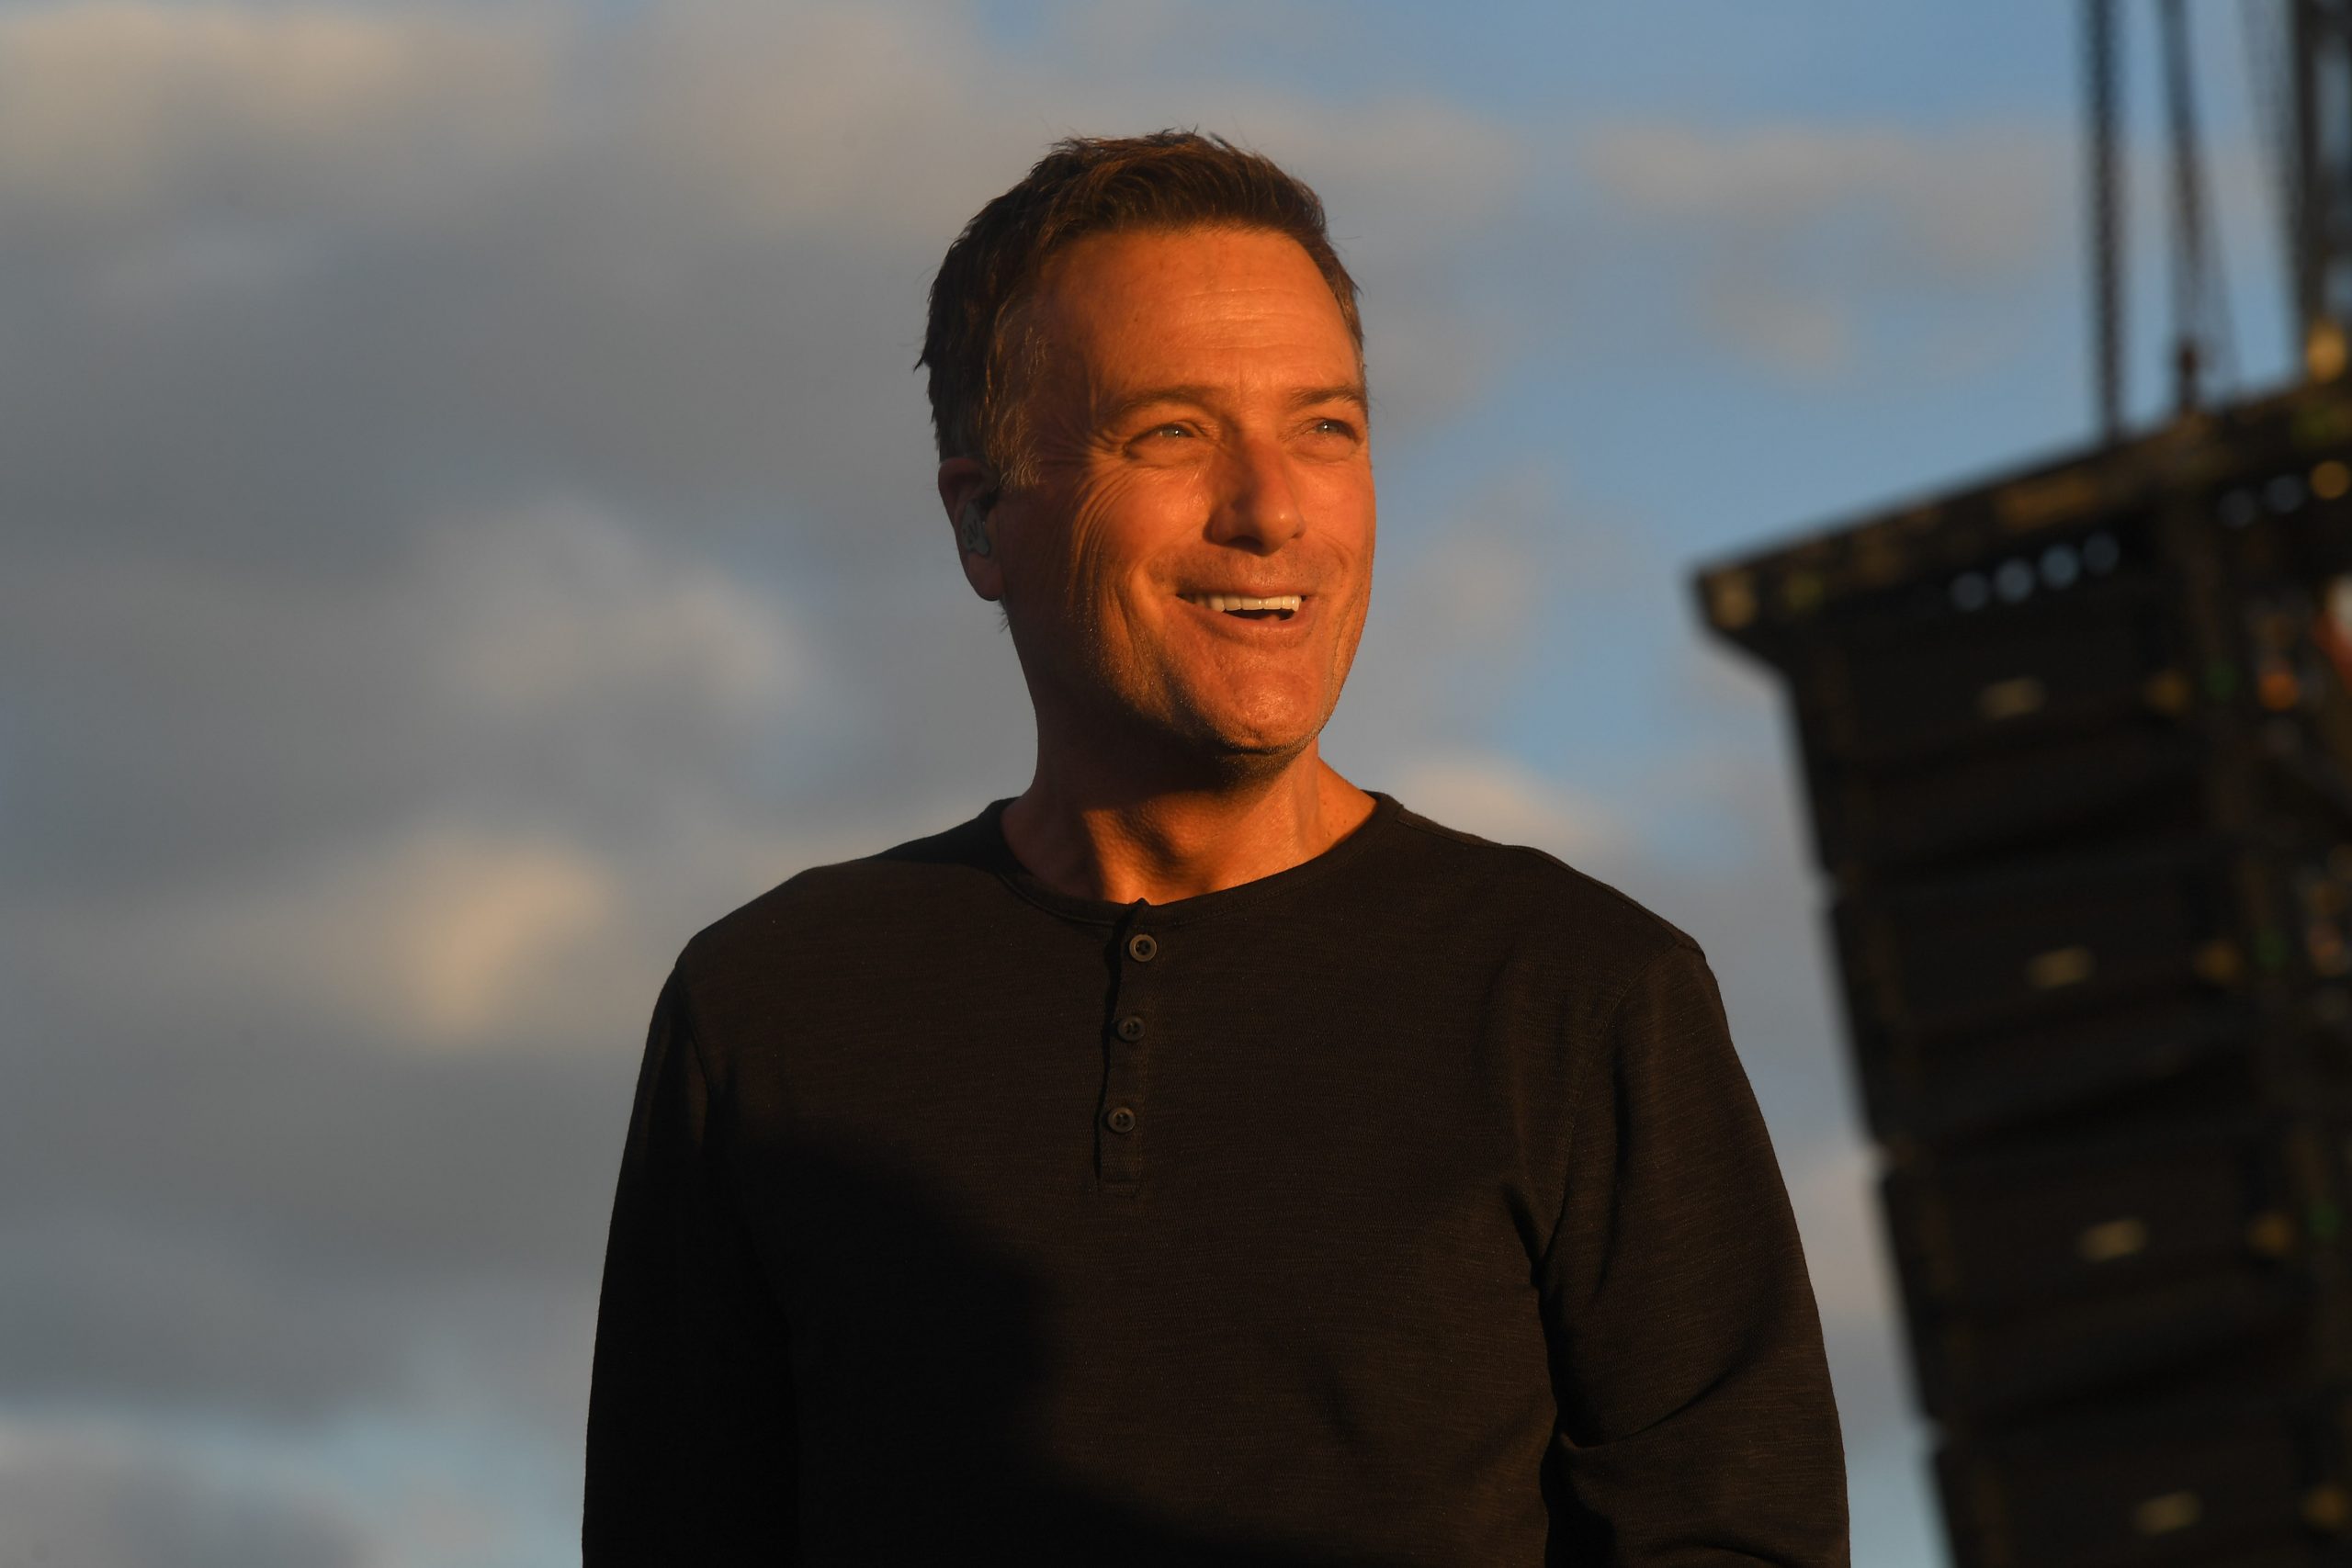 Michael W. Smith Brings Live Music Back For Fans With DriveIn Concert